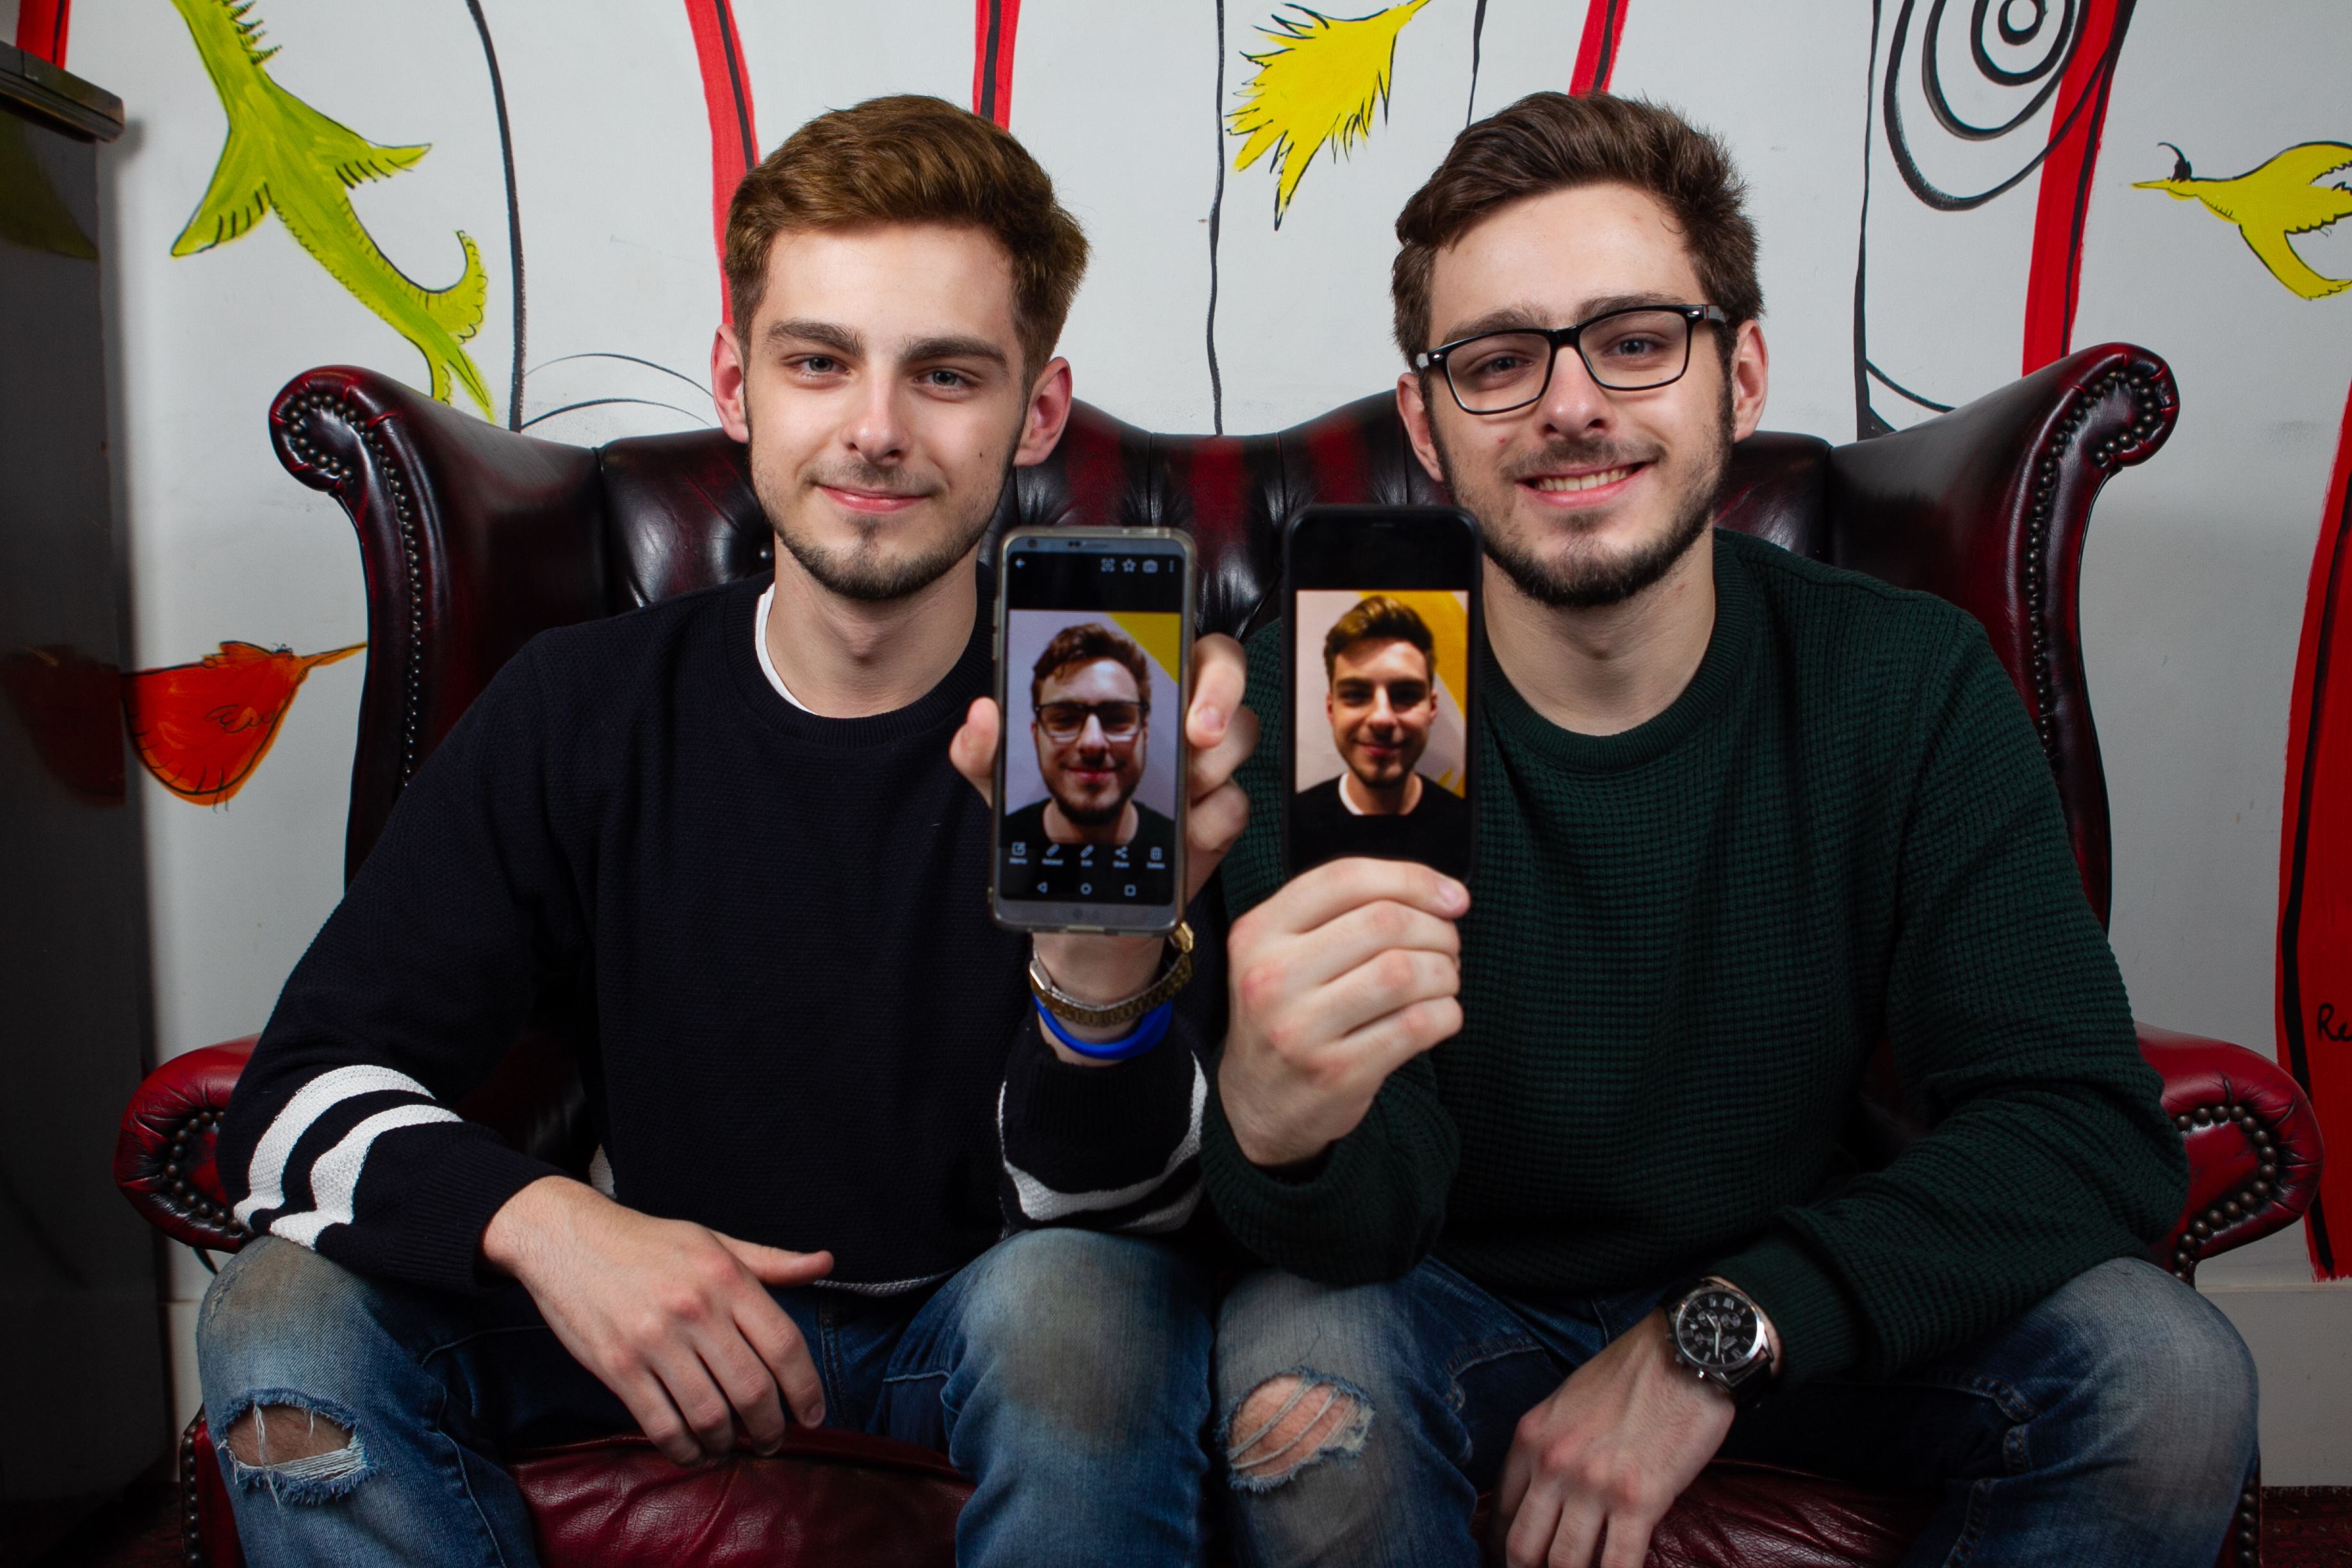 Thomas and William Johnson with their phones (Andrew Cawley / DC Thomson)